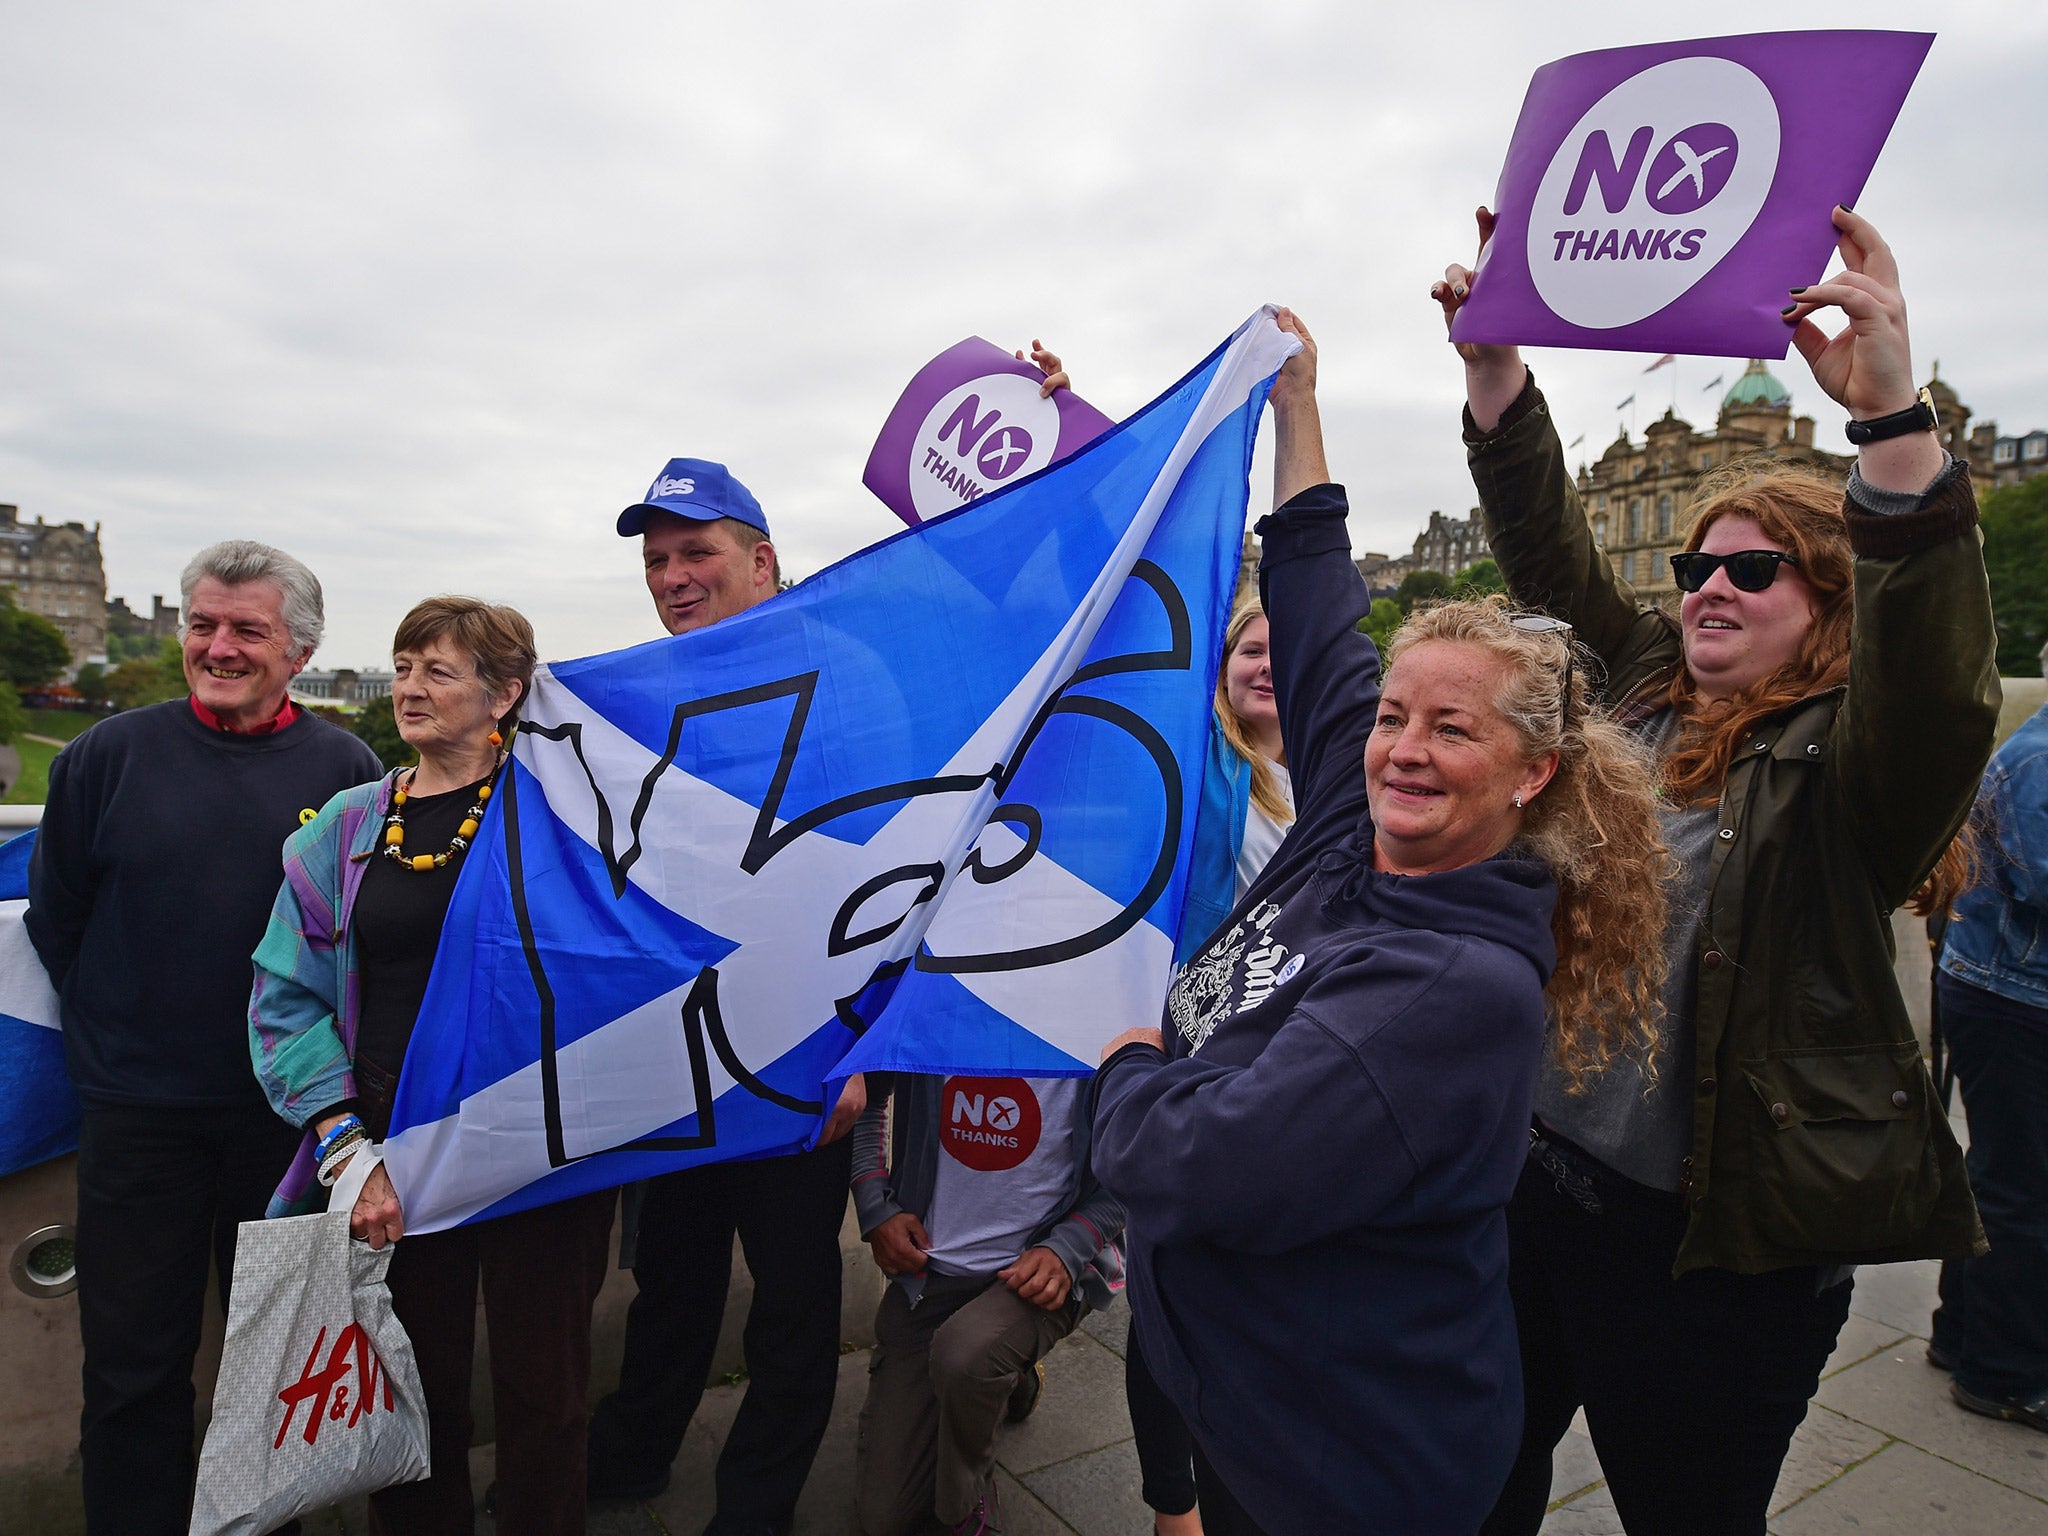 Yes and No supporters gather in Edinburgh on Tuesday